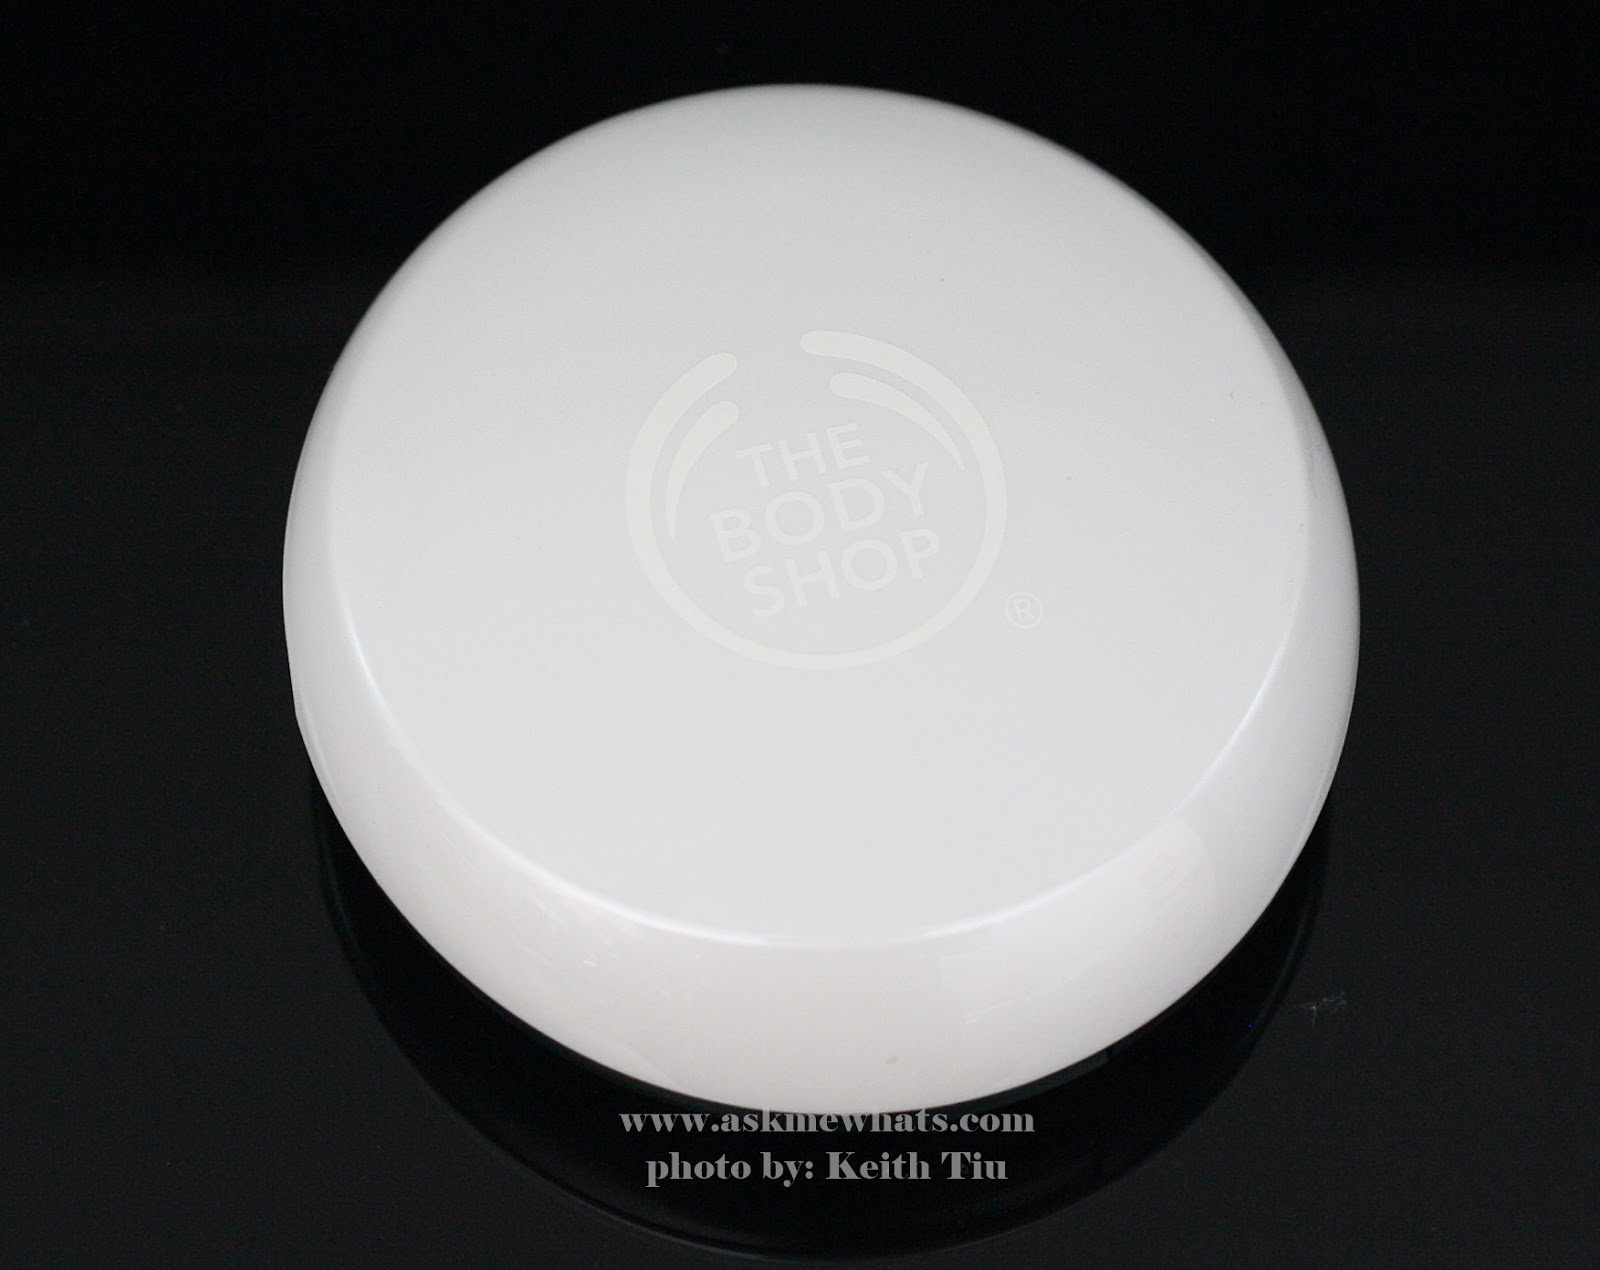 photo of The Body Shop New Moisture White Bright Compact Foundation SPF25 PA+++ Review